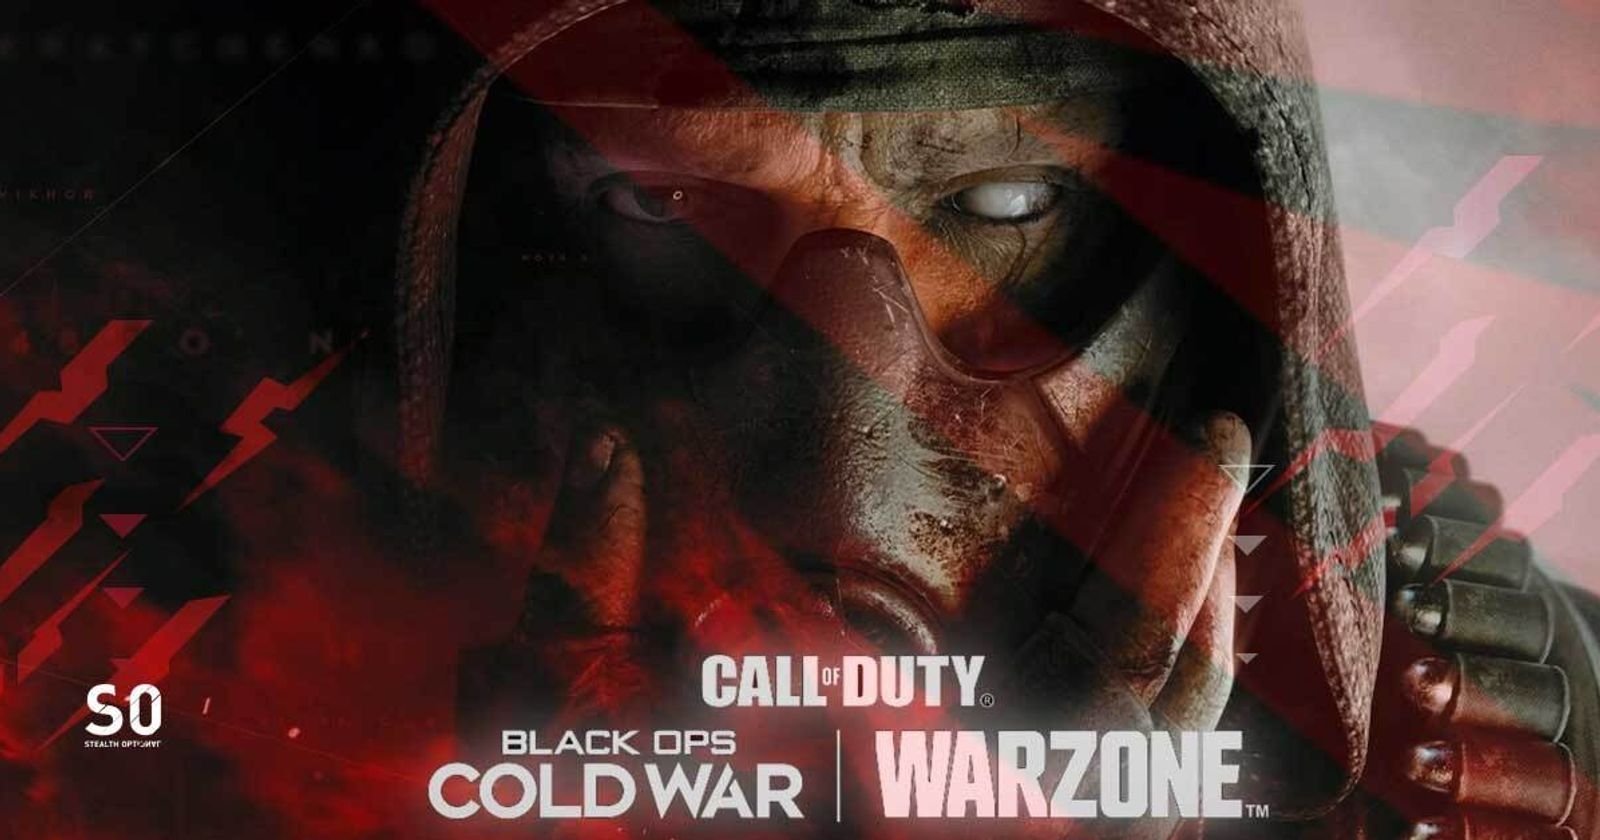 How to fix Activision.com Login page not working issue: Warzone 2fa  activison login page not working 